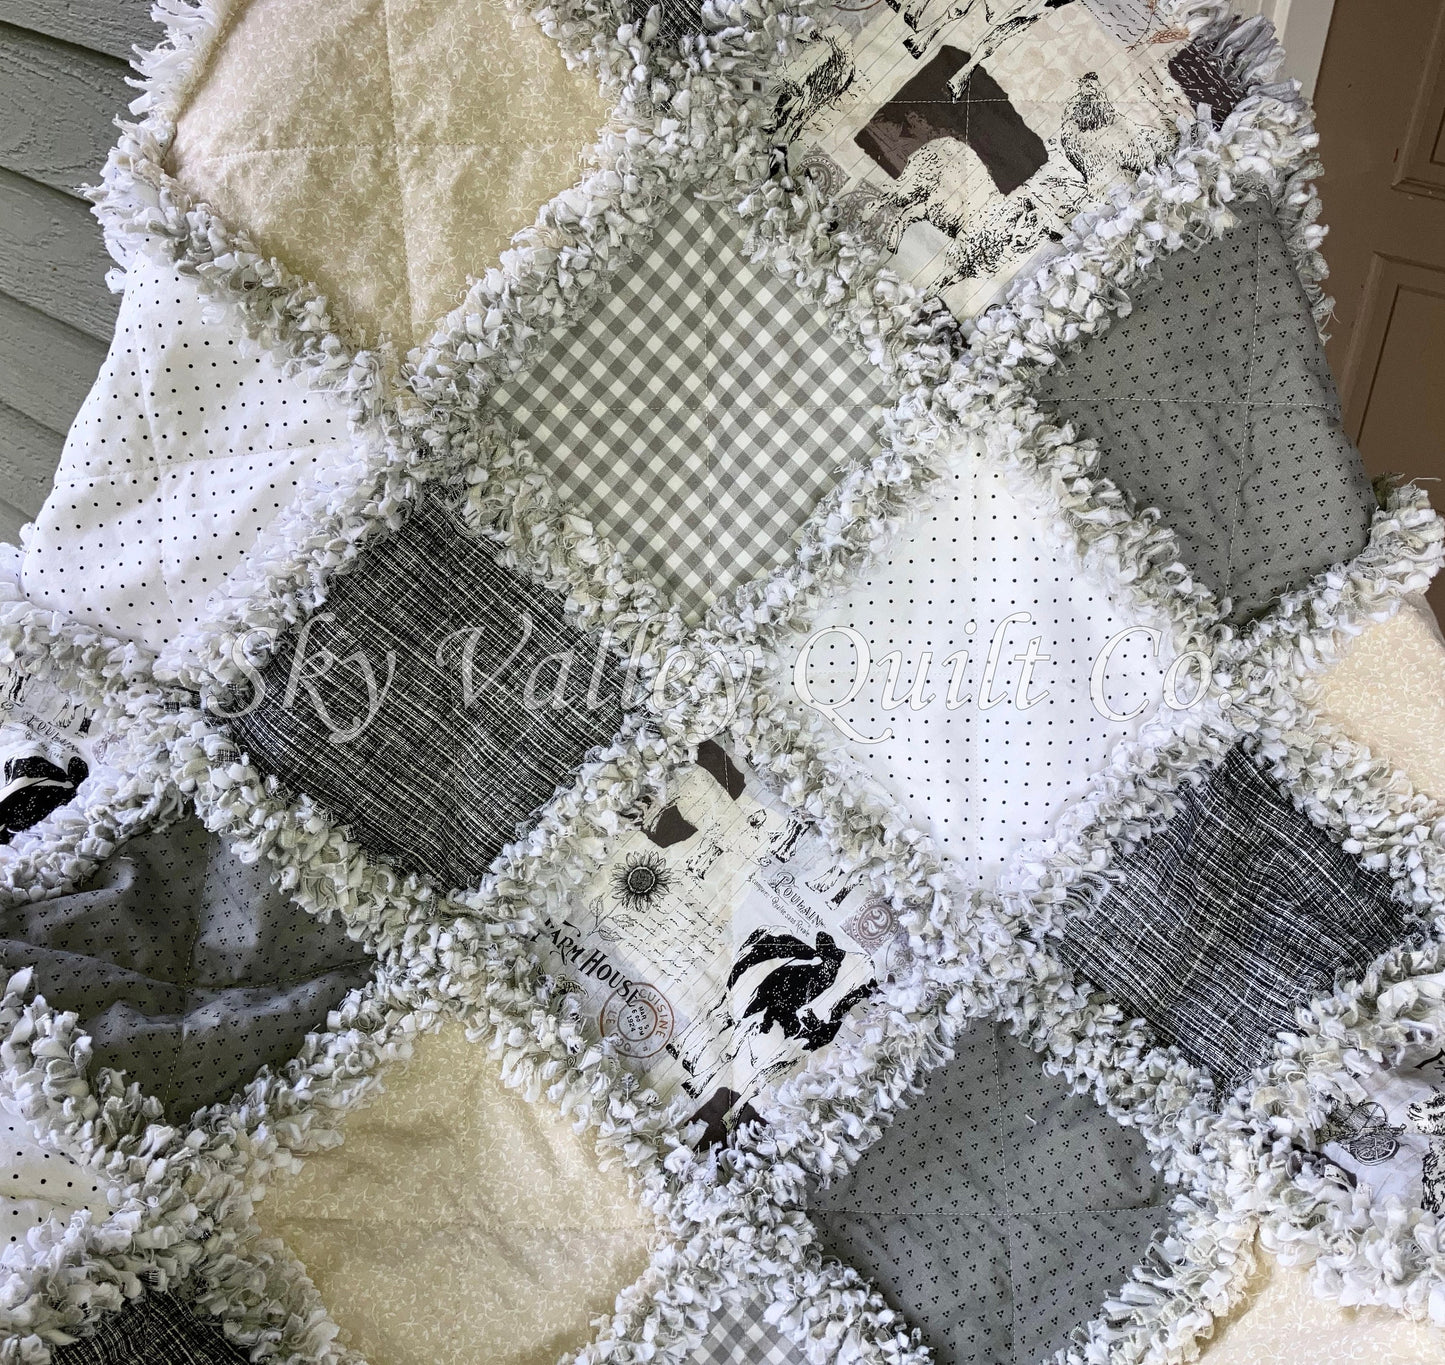 Pre CUT Rag Quilt KIT ~ Farm house chic neutral pallet, cream and gray, chickens cows, goats